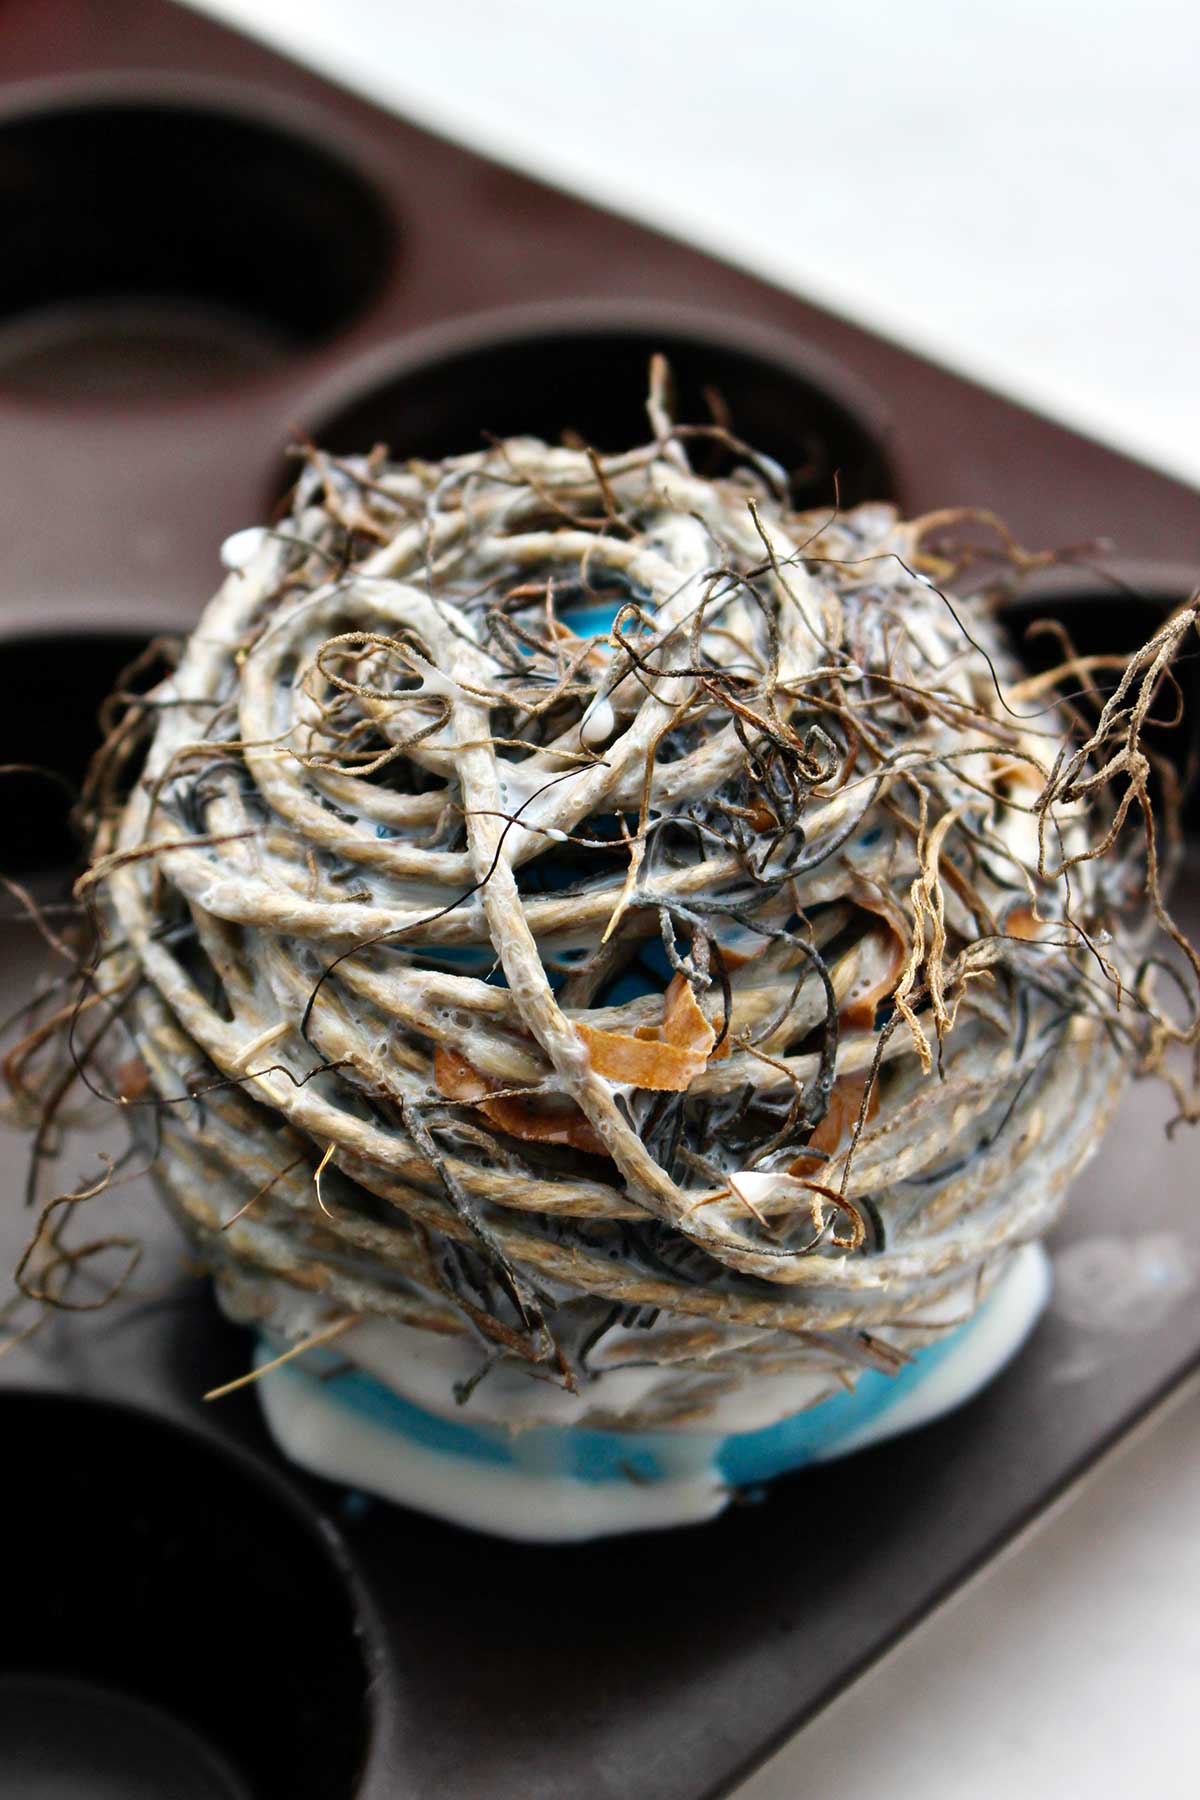 Inverted bird nest with balloon inside for shaping drying in a muffin tin.